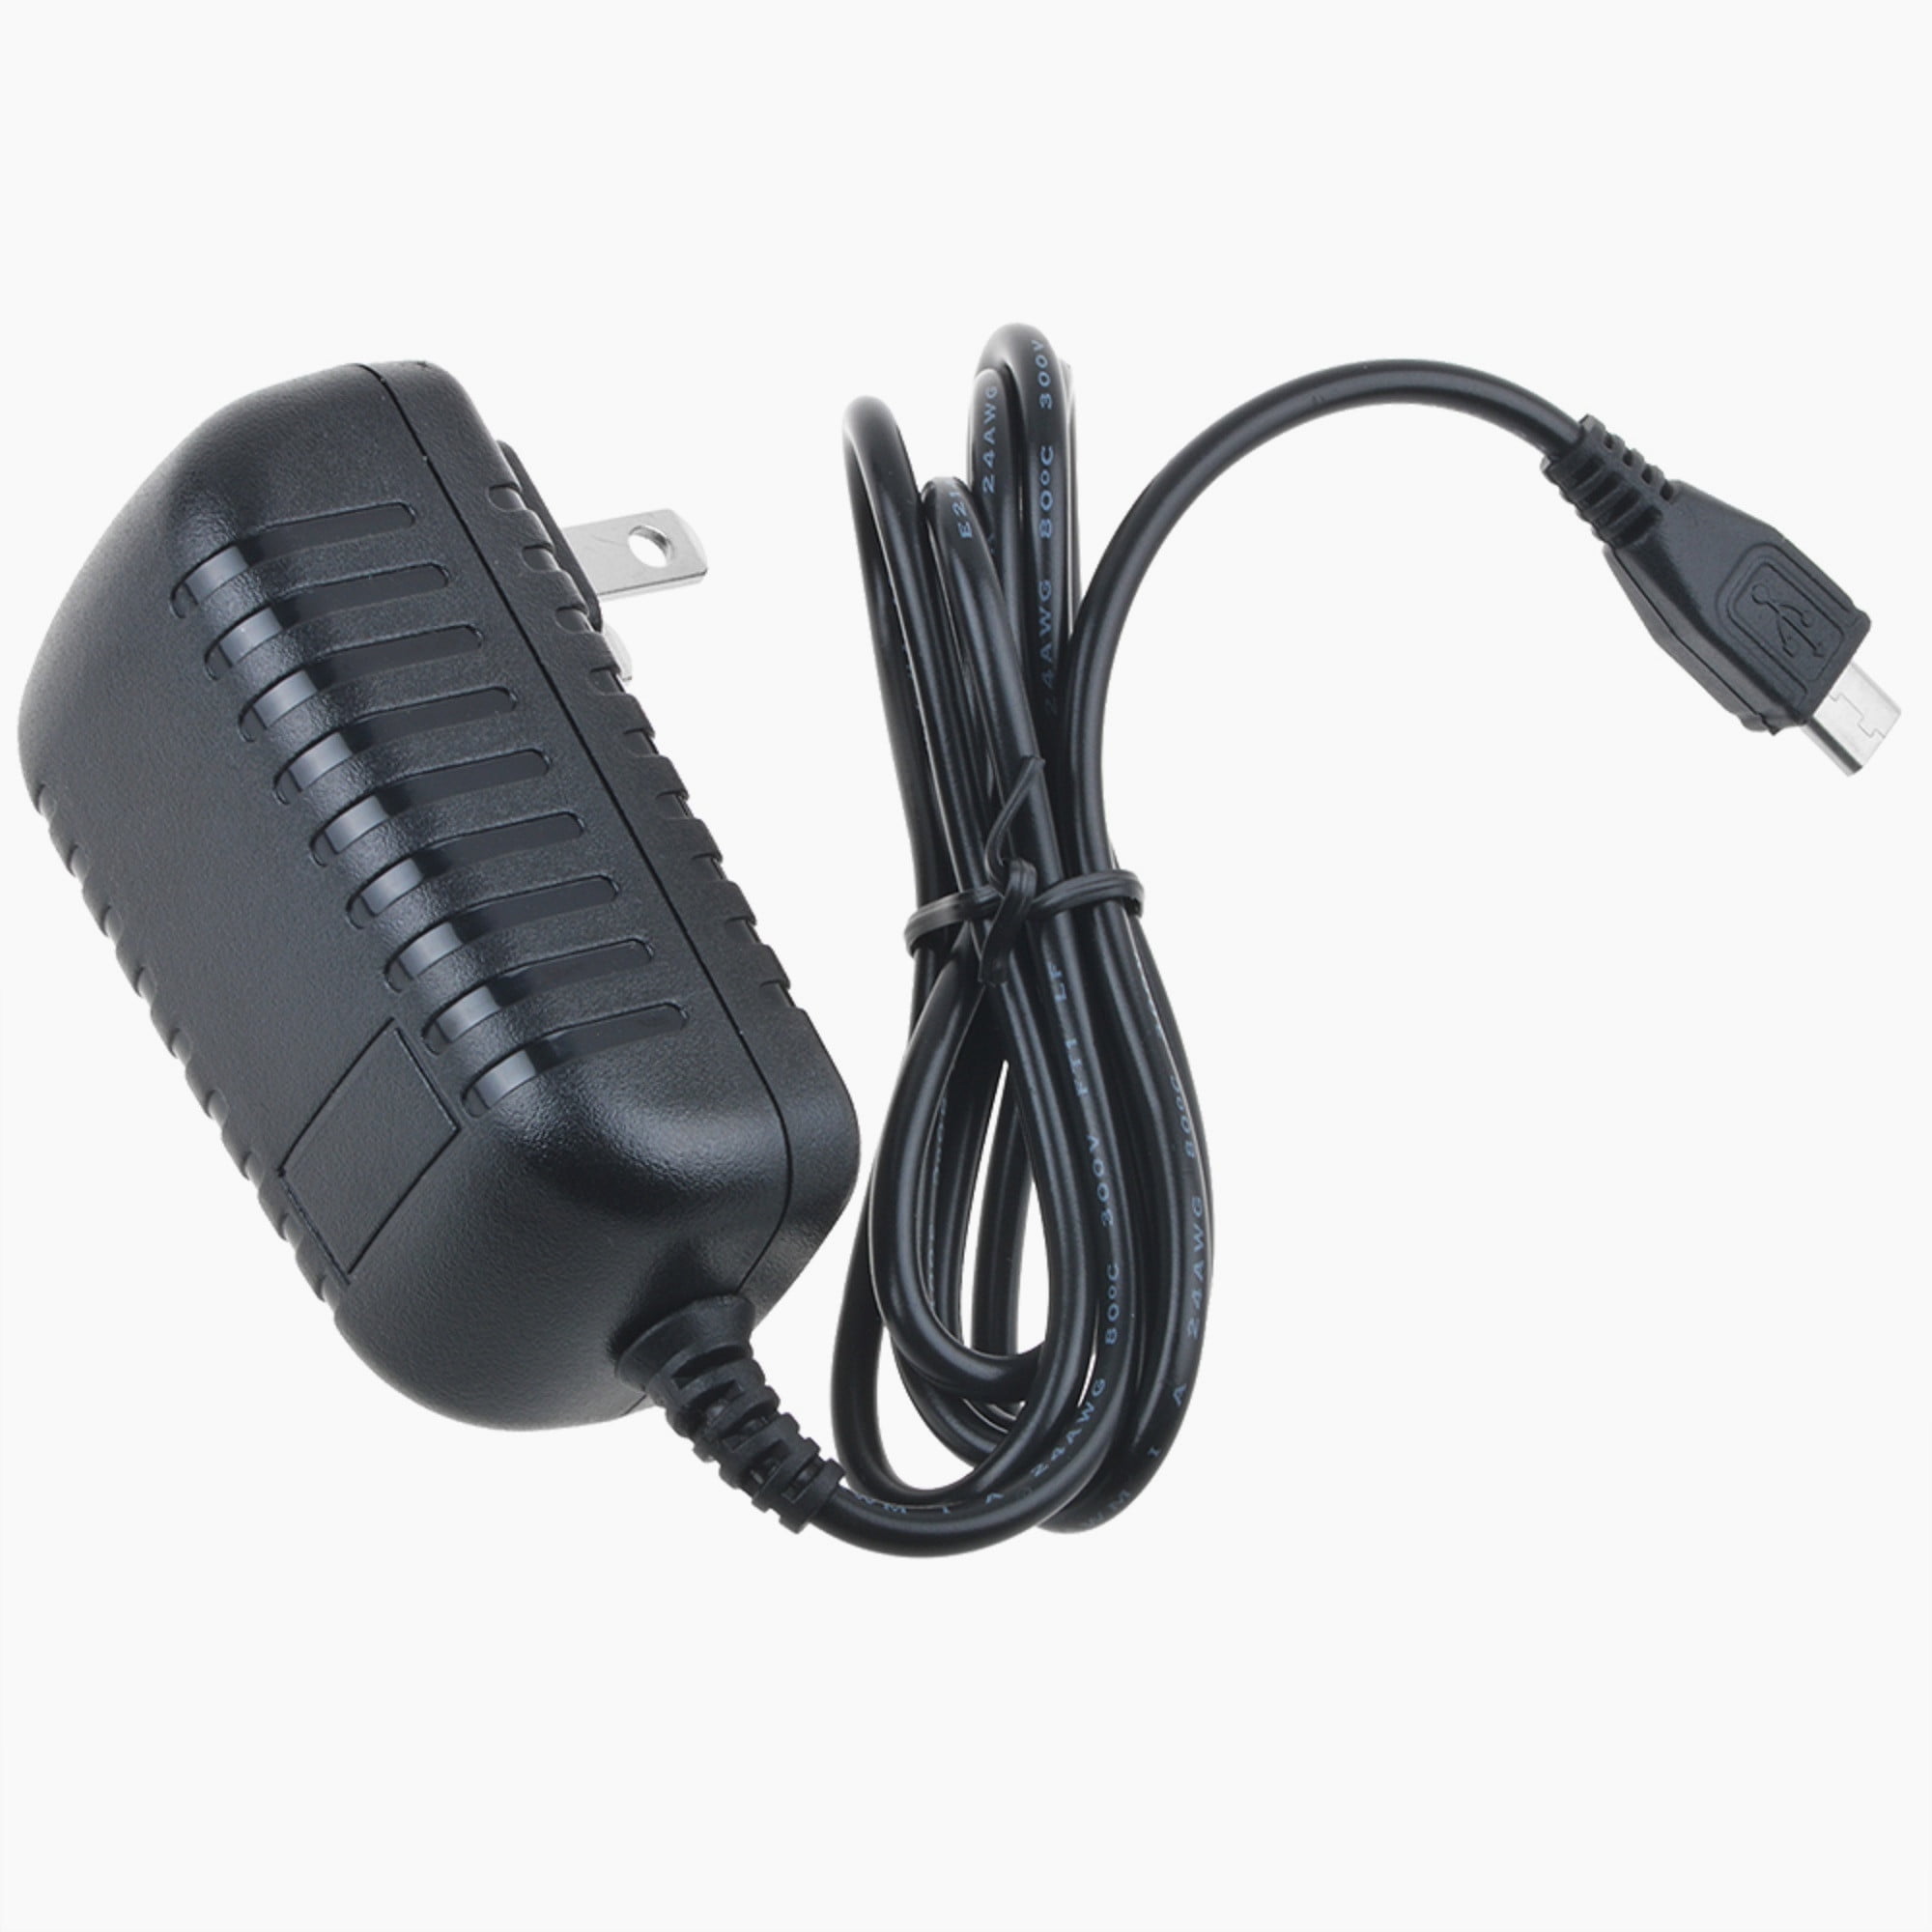 AC Adapter Charger Cord For Archos 70 101 G9 Turbo Tablet Power Supply 